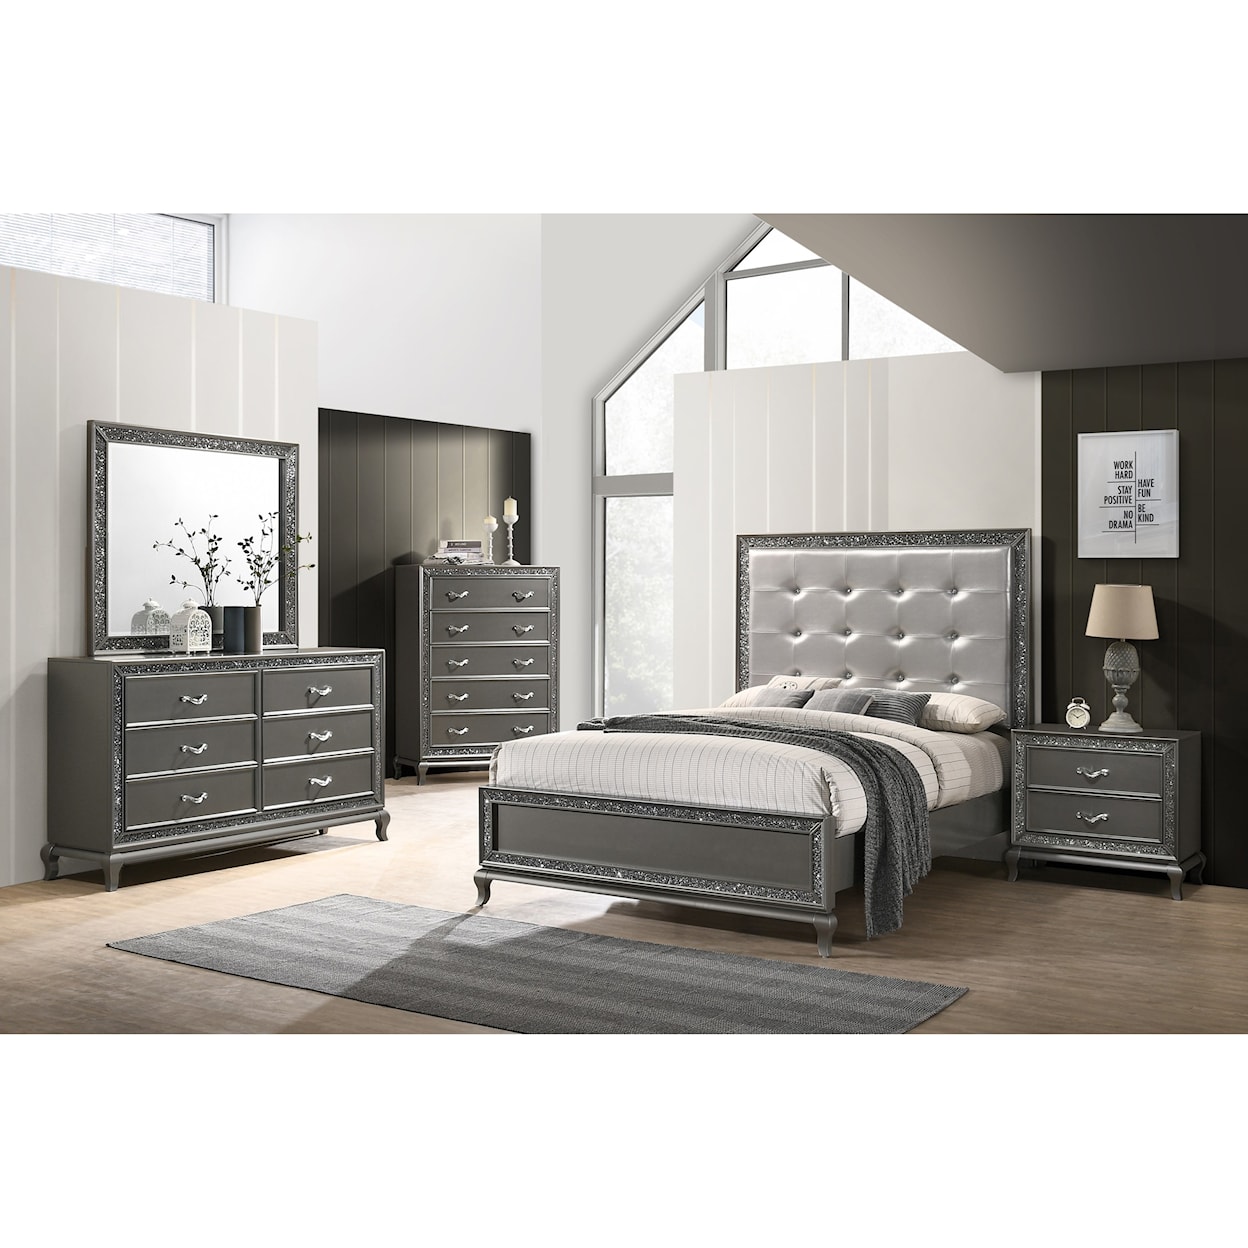 New Classic Park Imperial Queen Bedroom Group